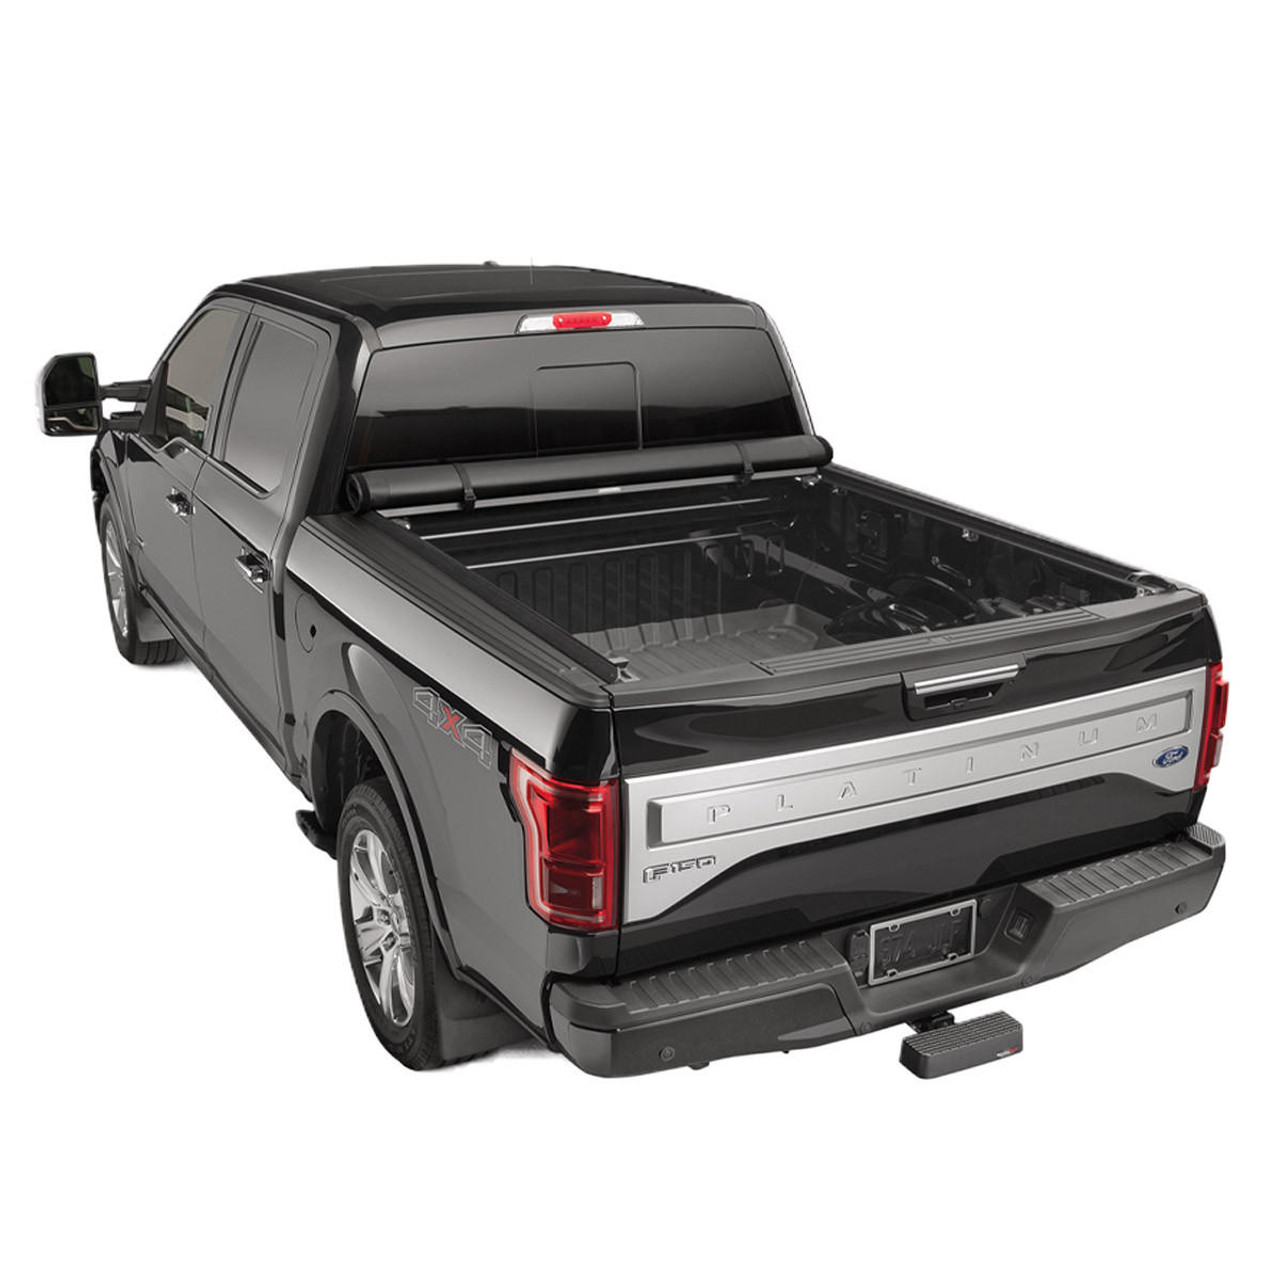 WeatherTech Roll Up Pickup Truck Bed Cover - Standard Length